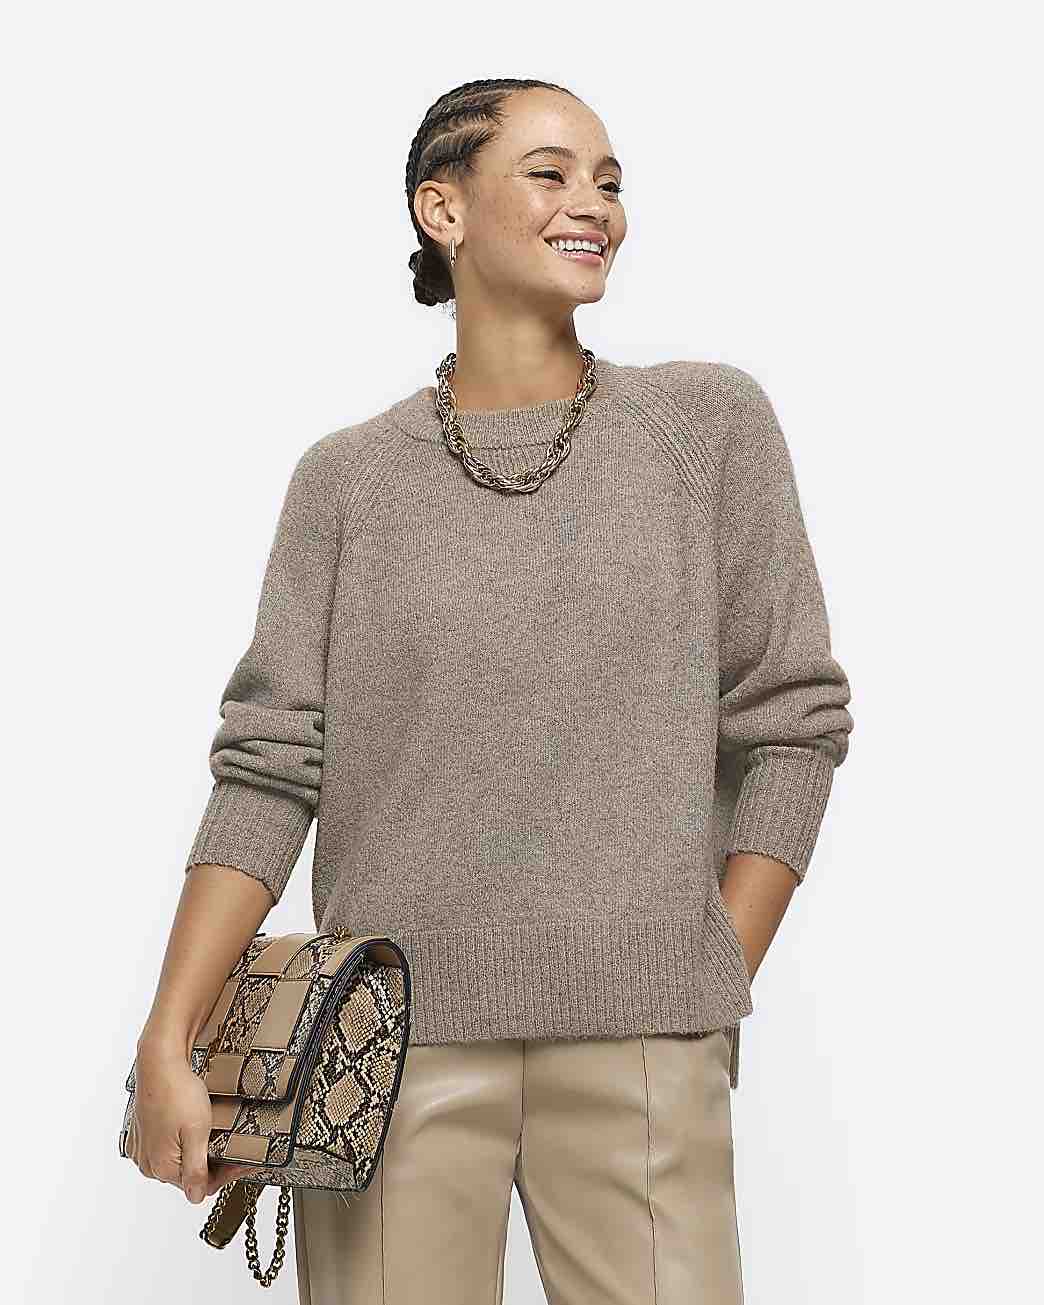 Five Things We Are Loving At River Island Knitted Crewneck Sweater staple pieces for your winter closet must have winter sweaters affordable sweater for winter nashville stylists share affordable winter pieces what to buy for your winter closet